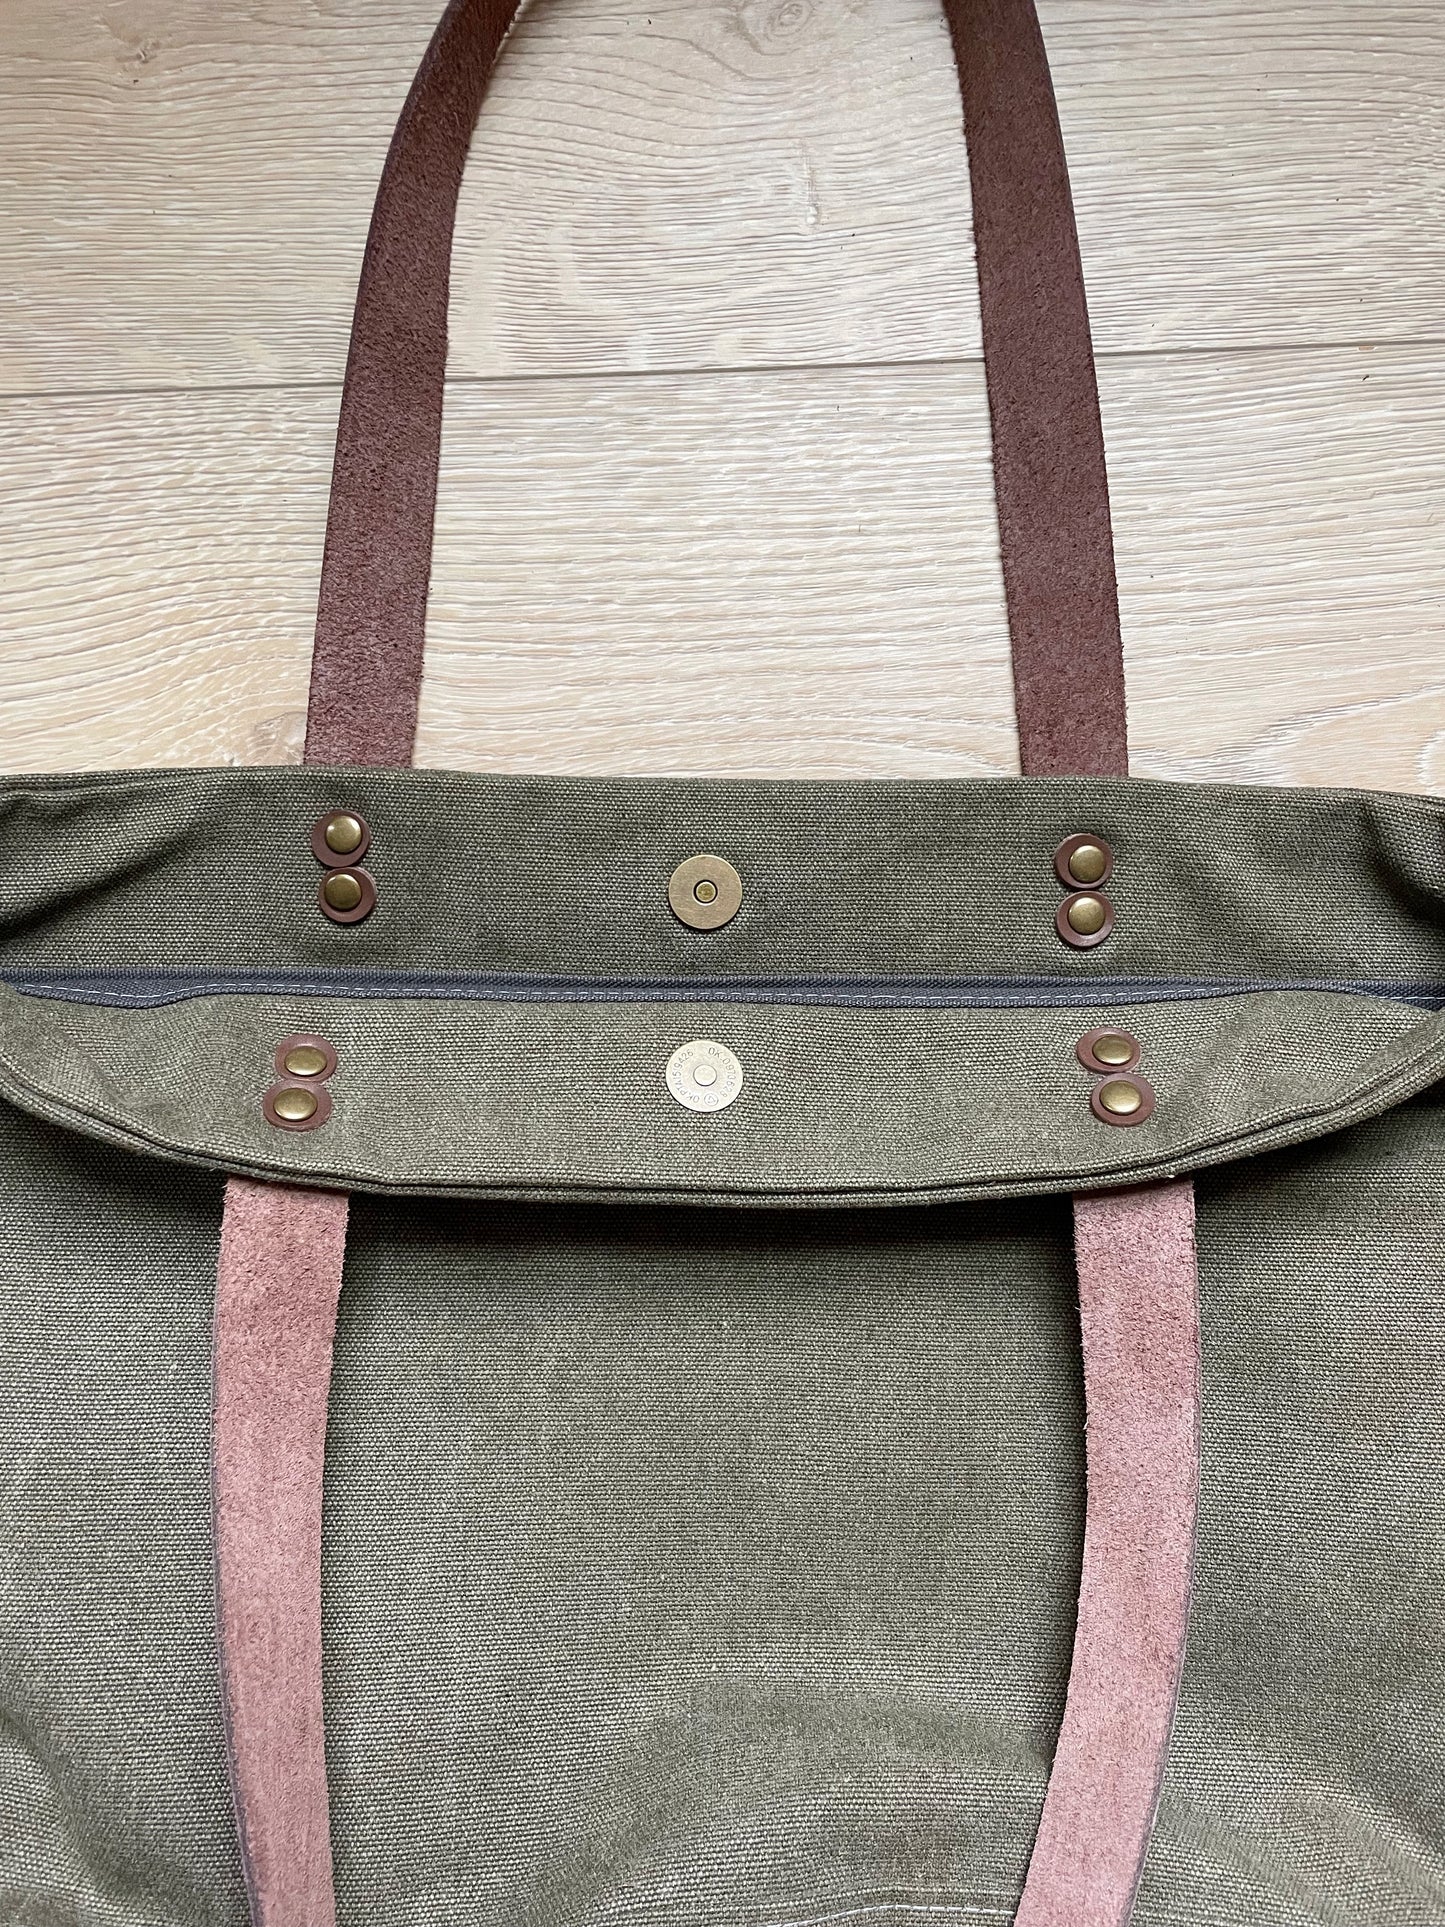 Olive green canvas tote bag